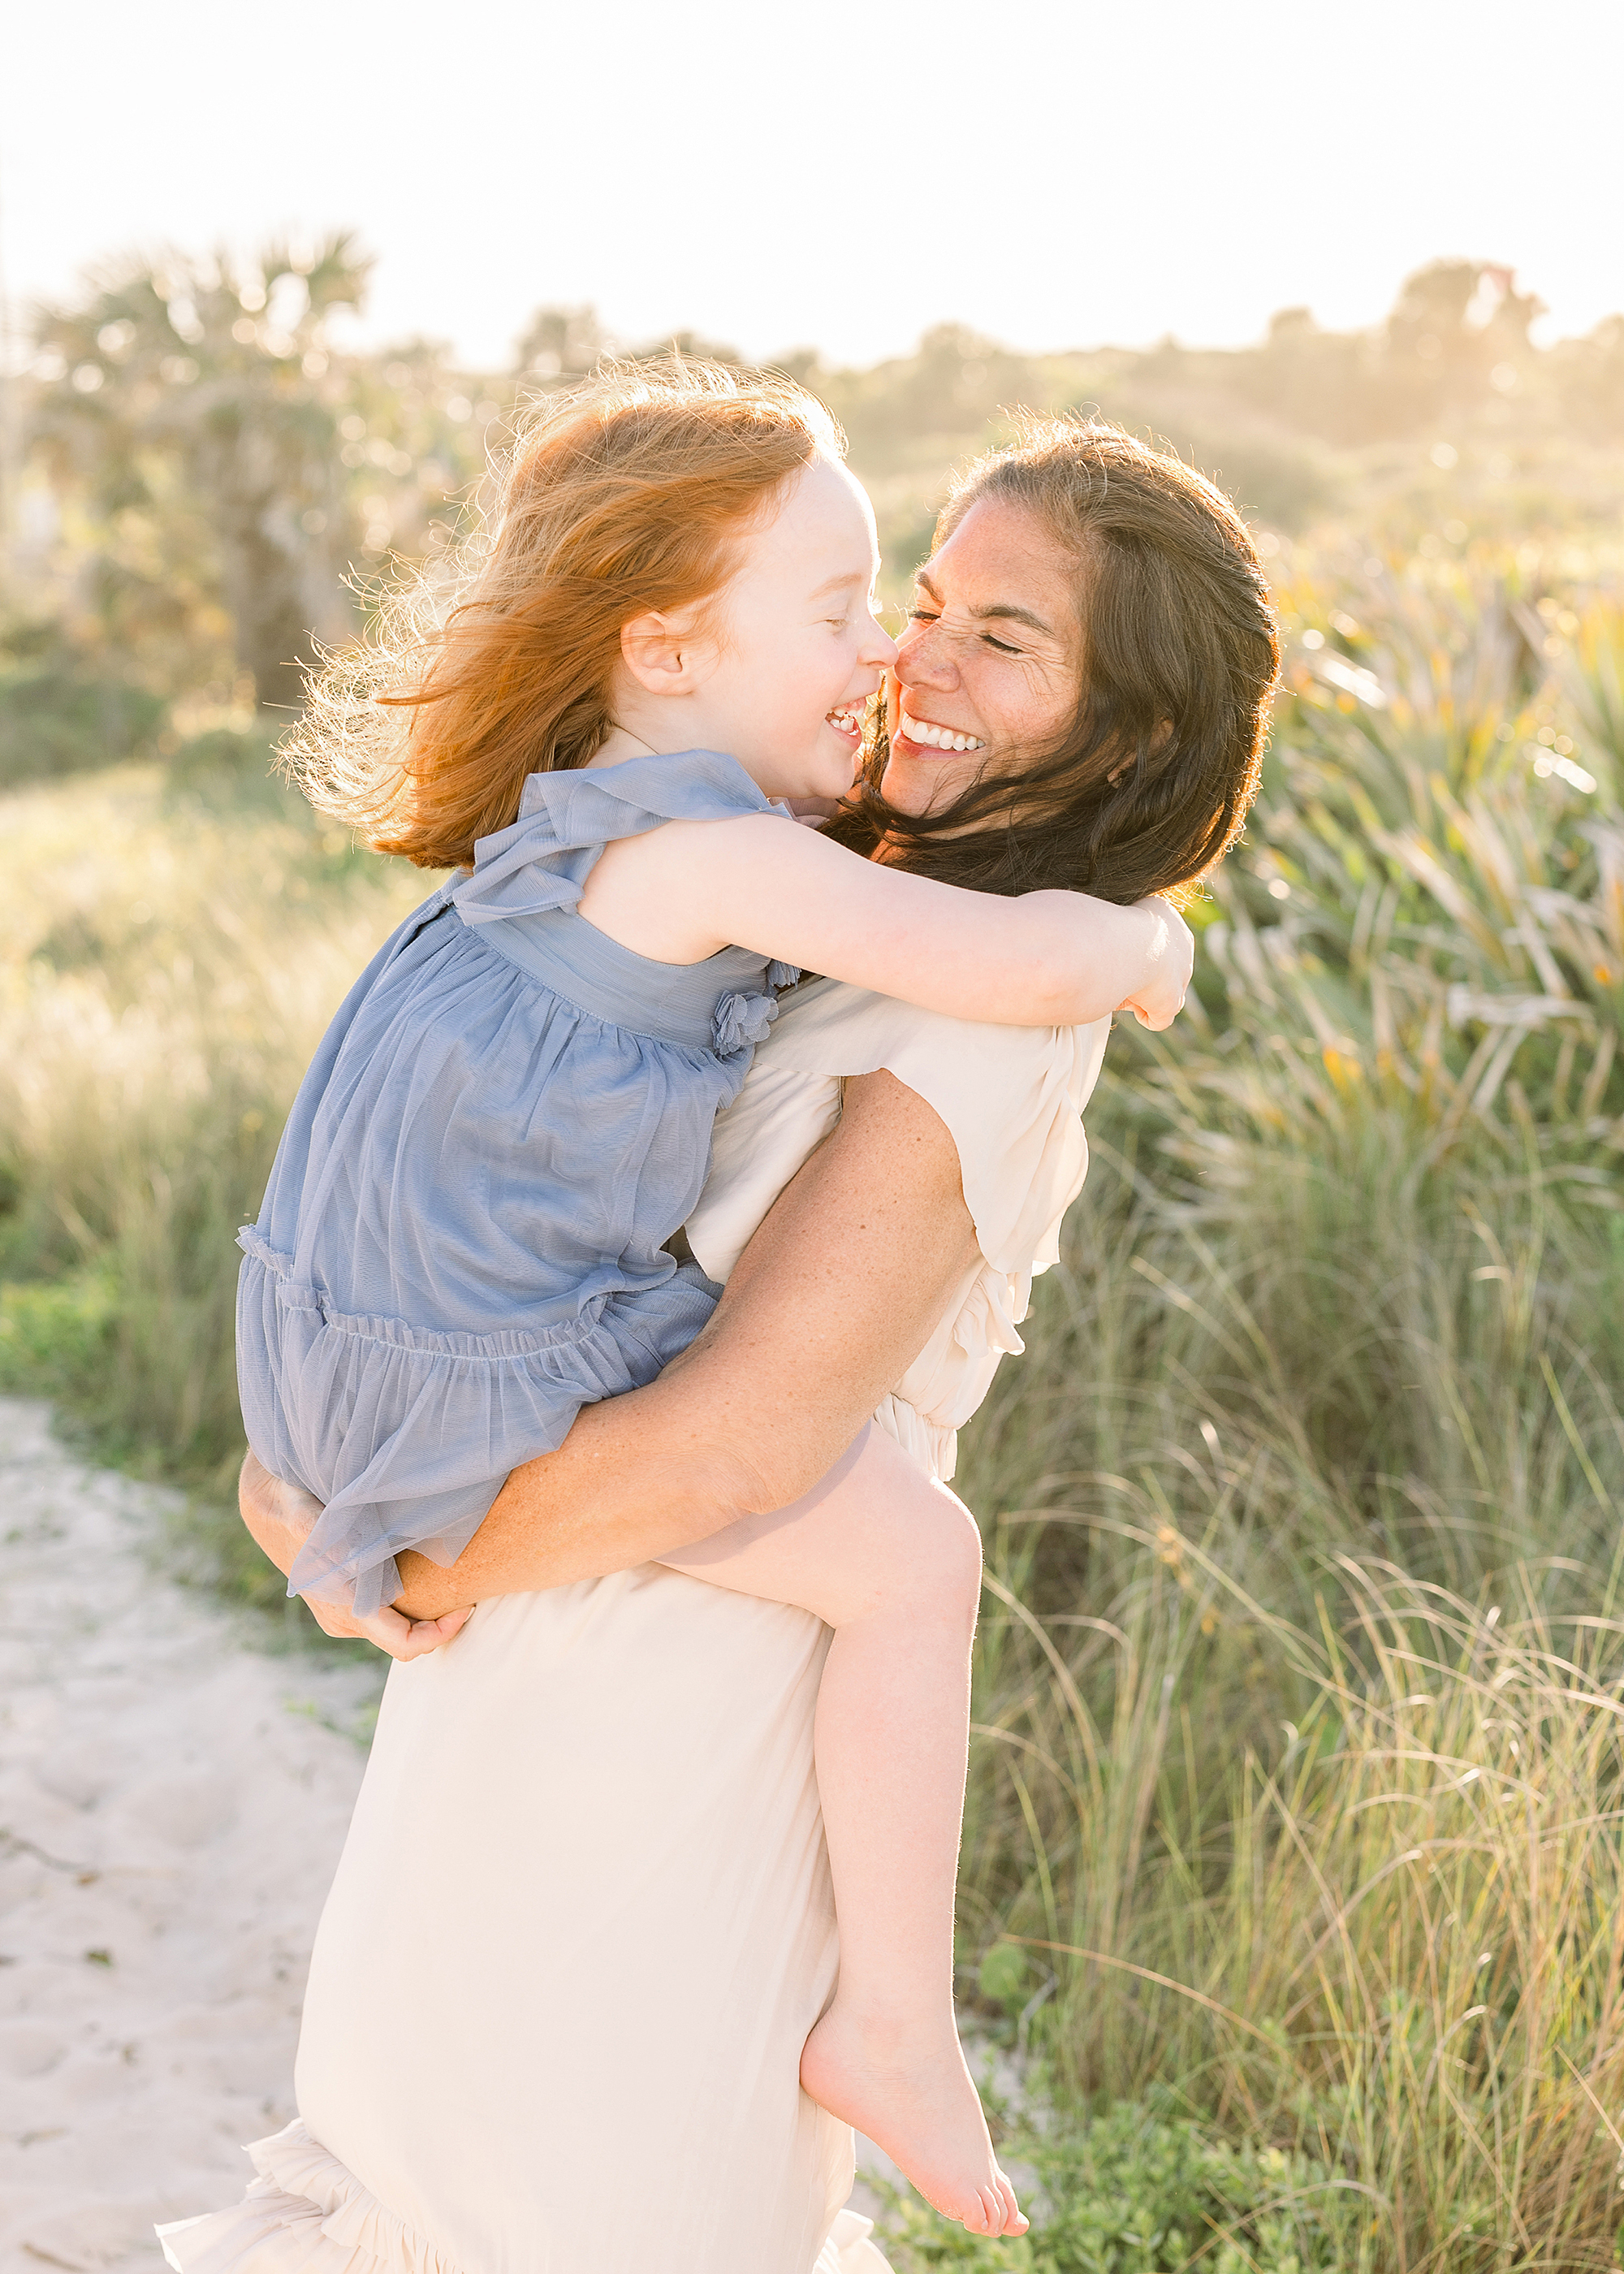 A motherhood portrait of a woman with her red haired daughter at sunset on the beach.